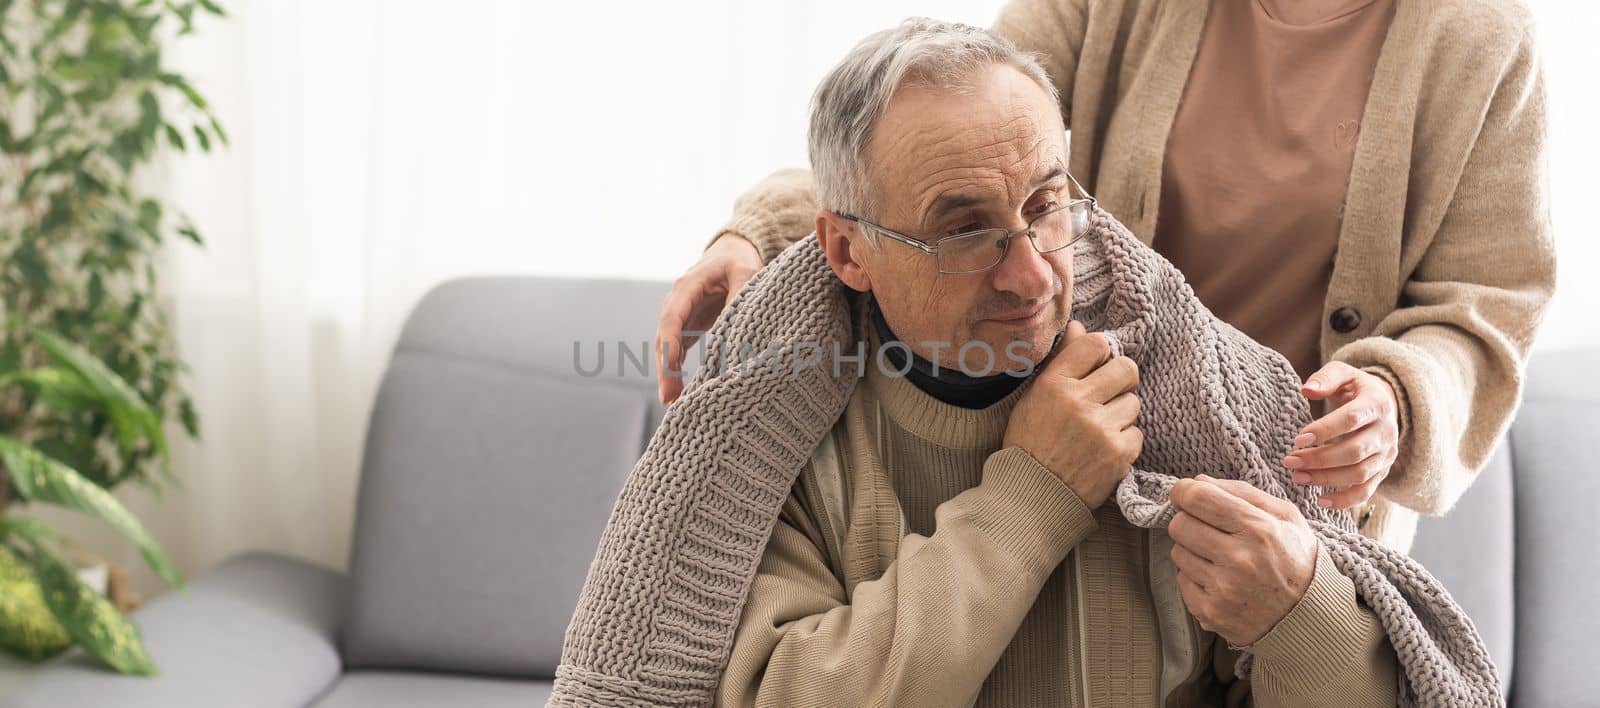 Senior couple, happy and laughing in their home with love, care and support for retirement lifestyle. Commitment of a funny man and woman in a marriage with trust and security on a living room couch